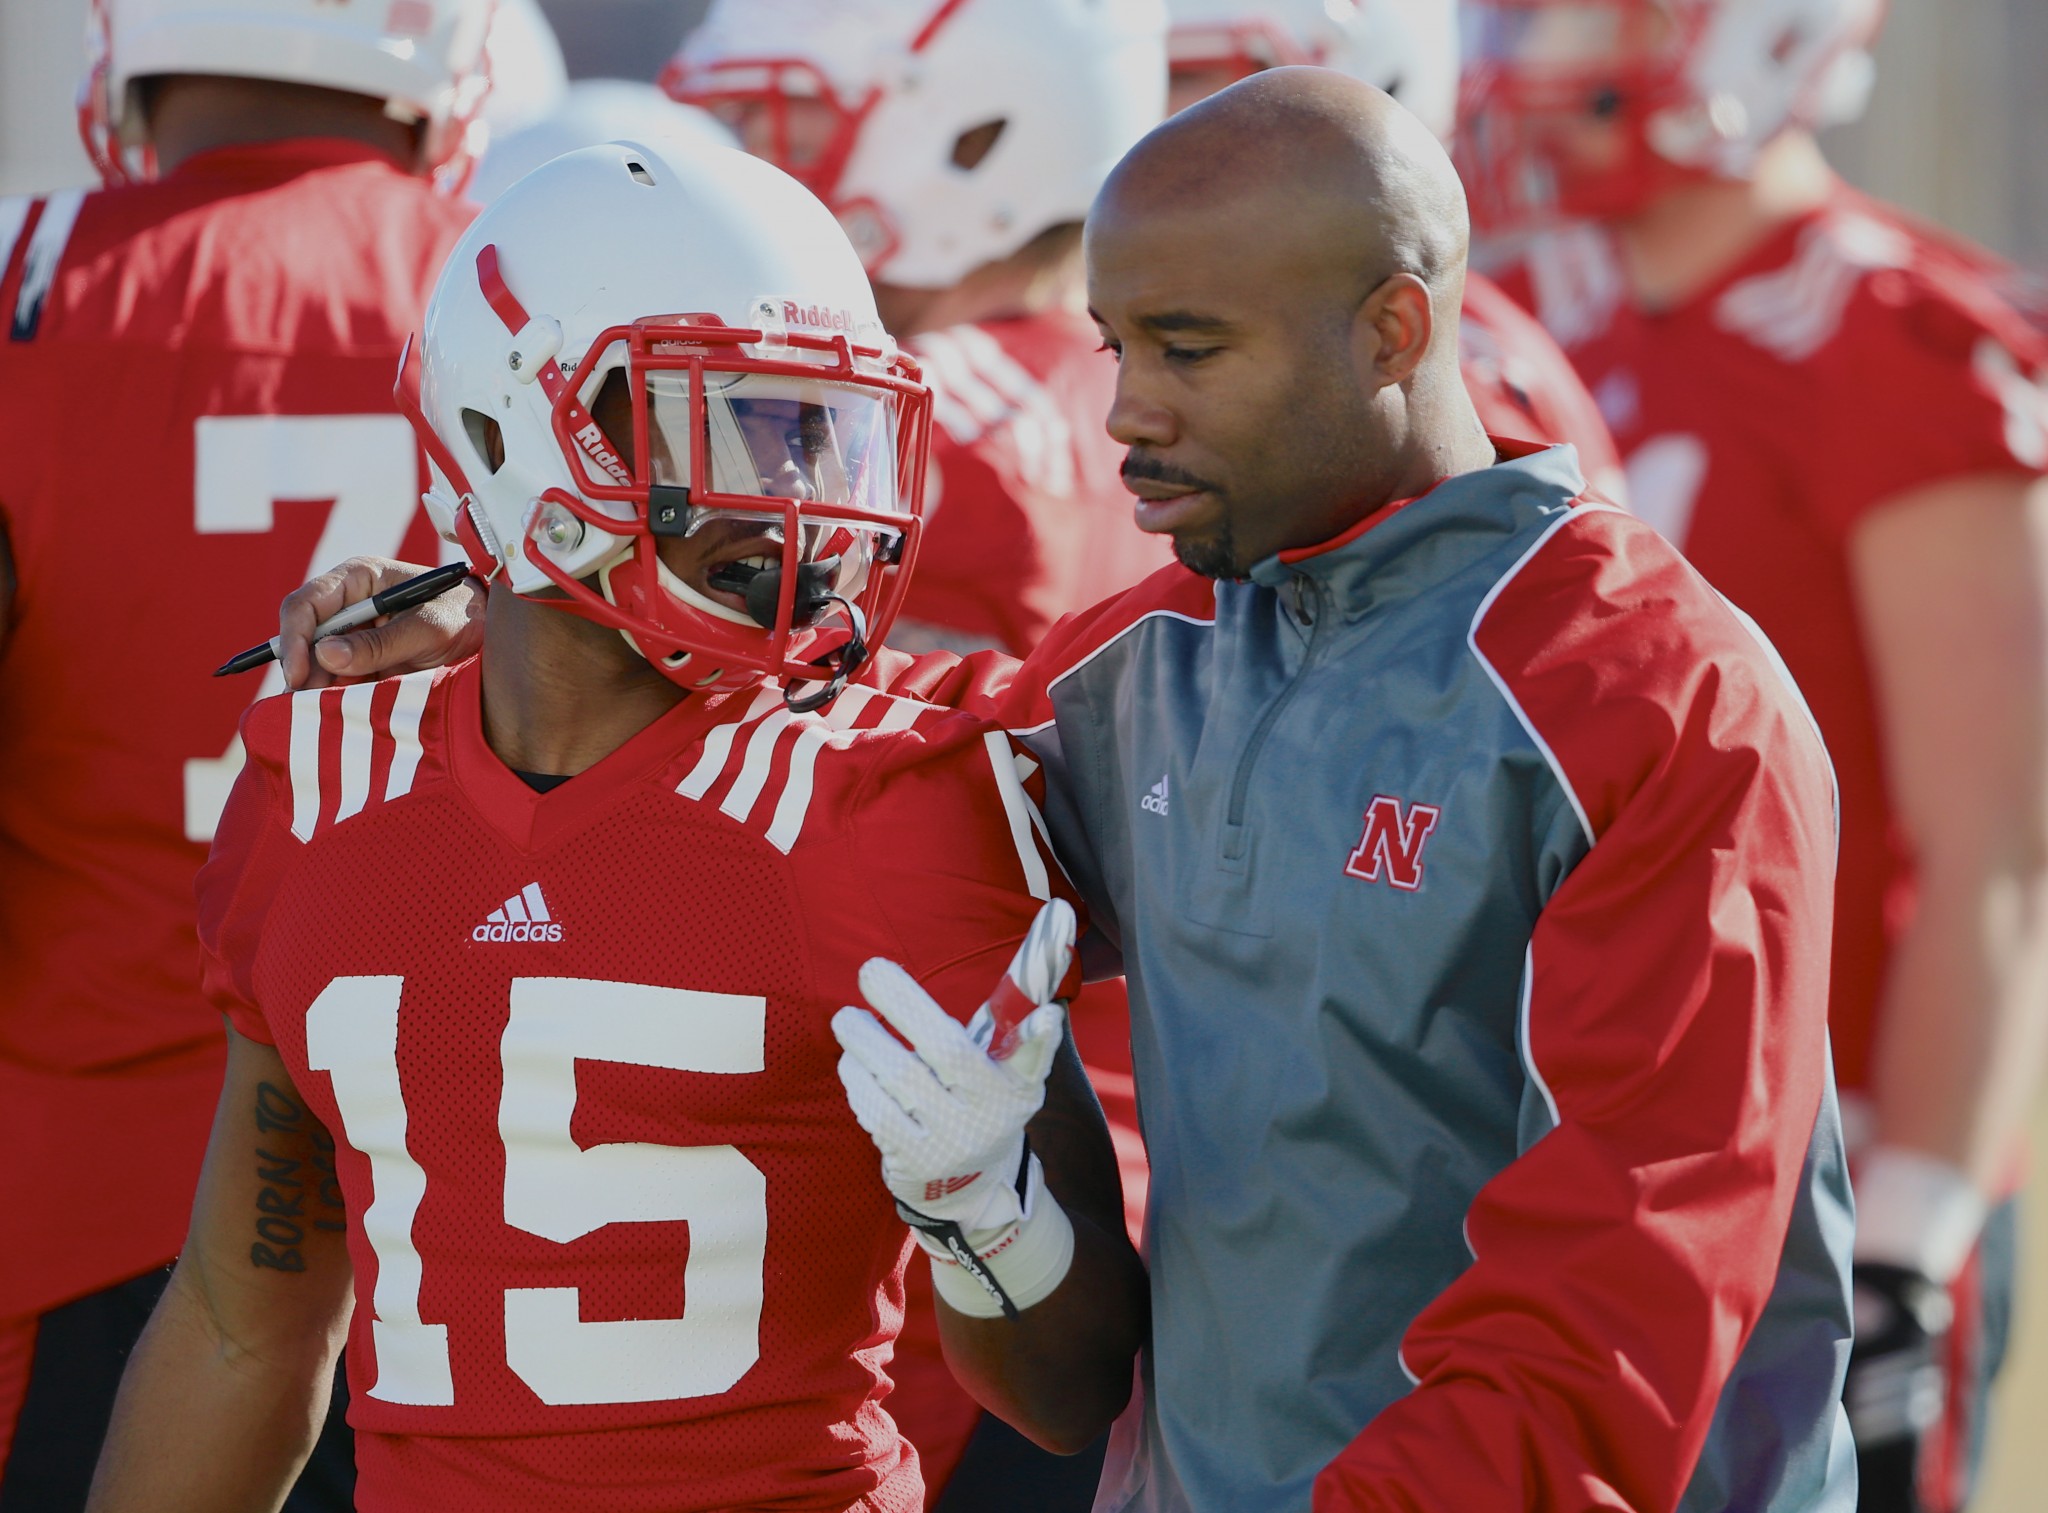 Nebraska wide receivers coach Keith Williams talks to wide receiver De'Mornay Pierson-El (15) on the first day of spring NCAA college football practice in Lincoln, Neb., Saturday, March 7, 2015. (AP Photo/Nati Harnik)